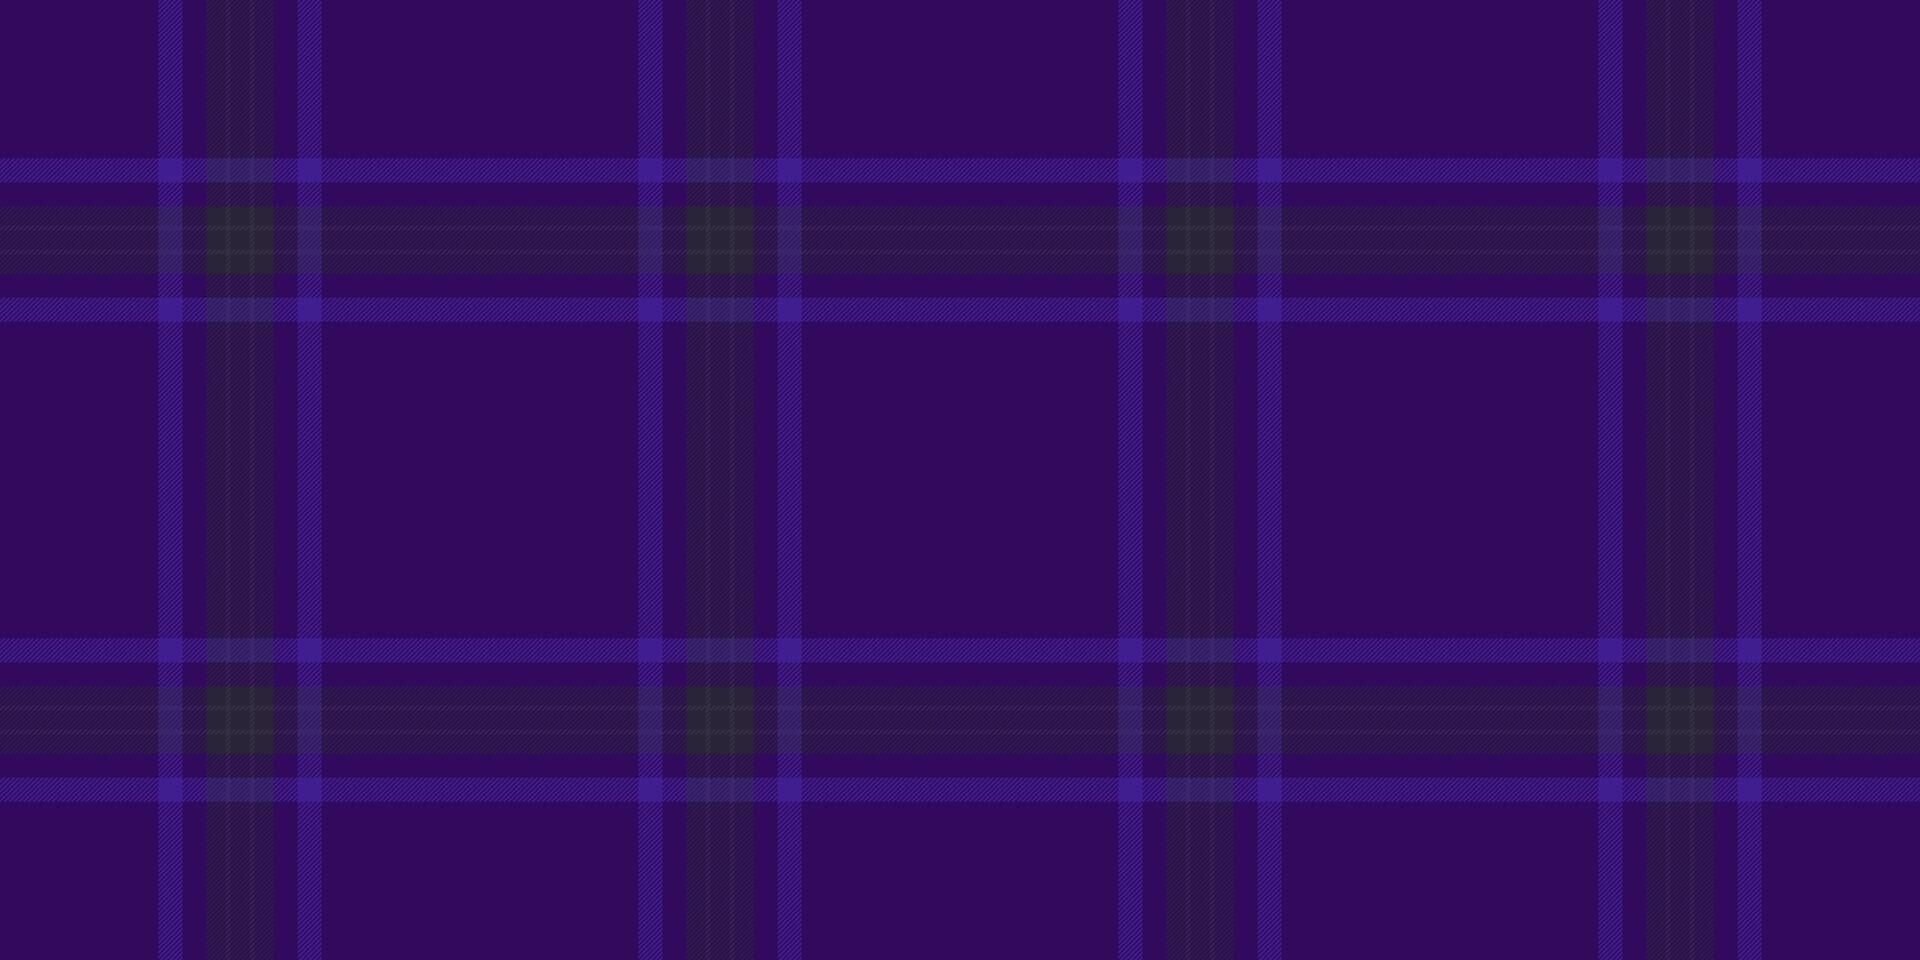 Customizable check tartan textile, purity vector pattern background. Path plaid seamless fabric texture in violet and dark colors.